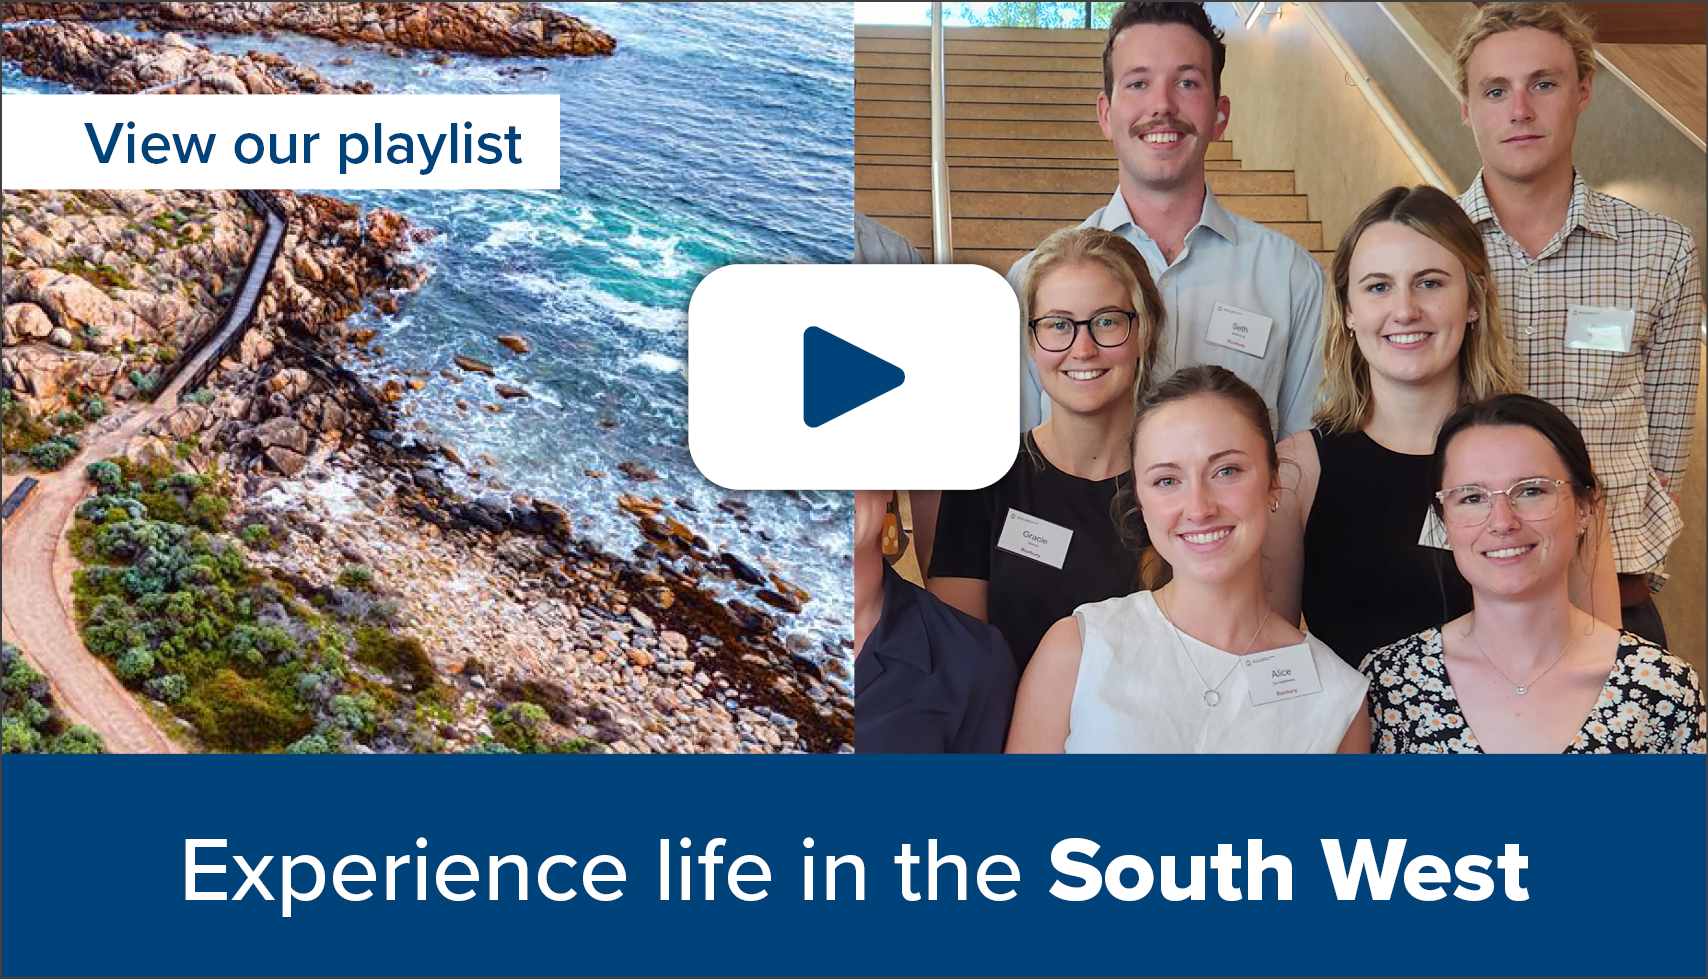 Experience life in the South West